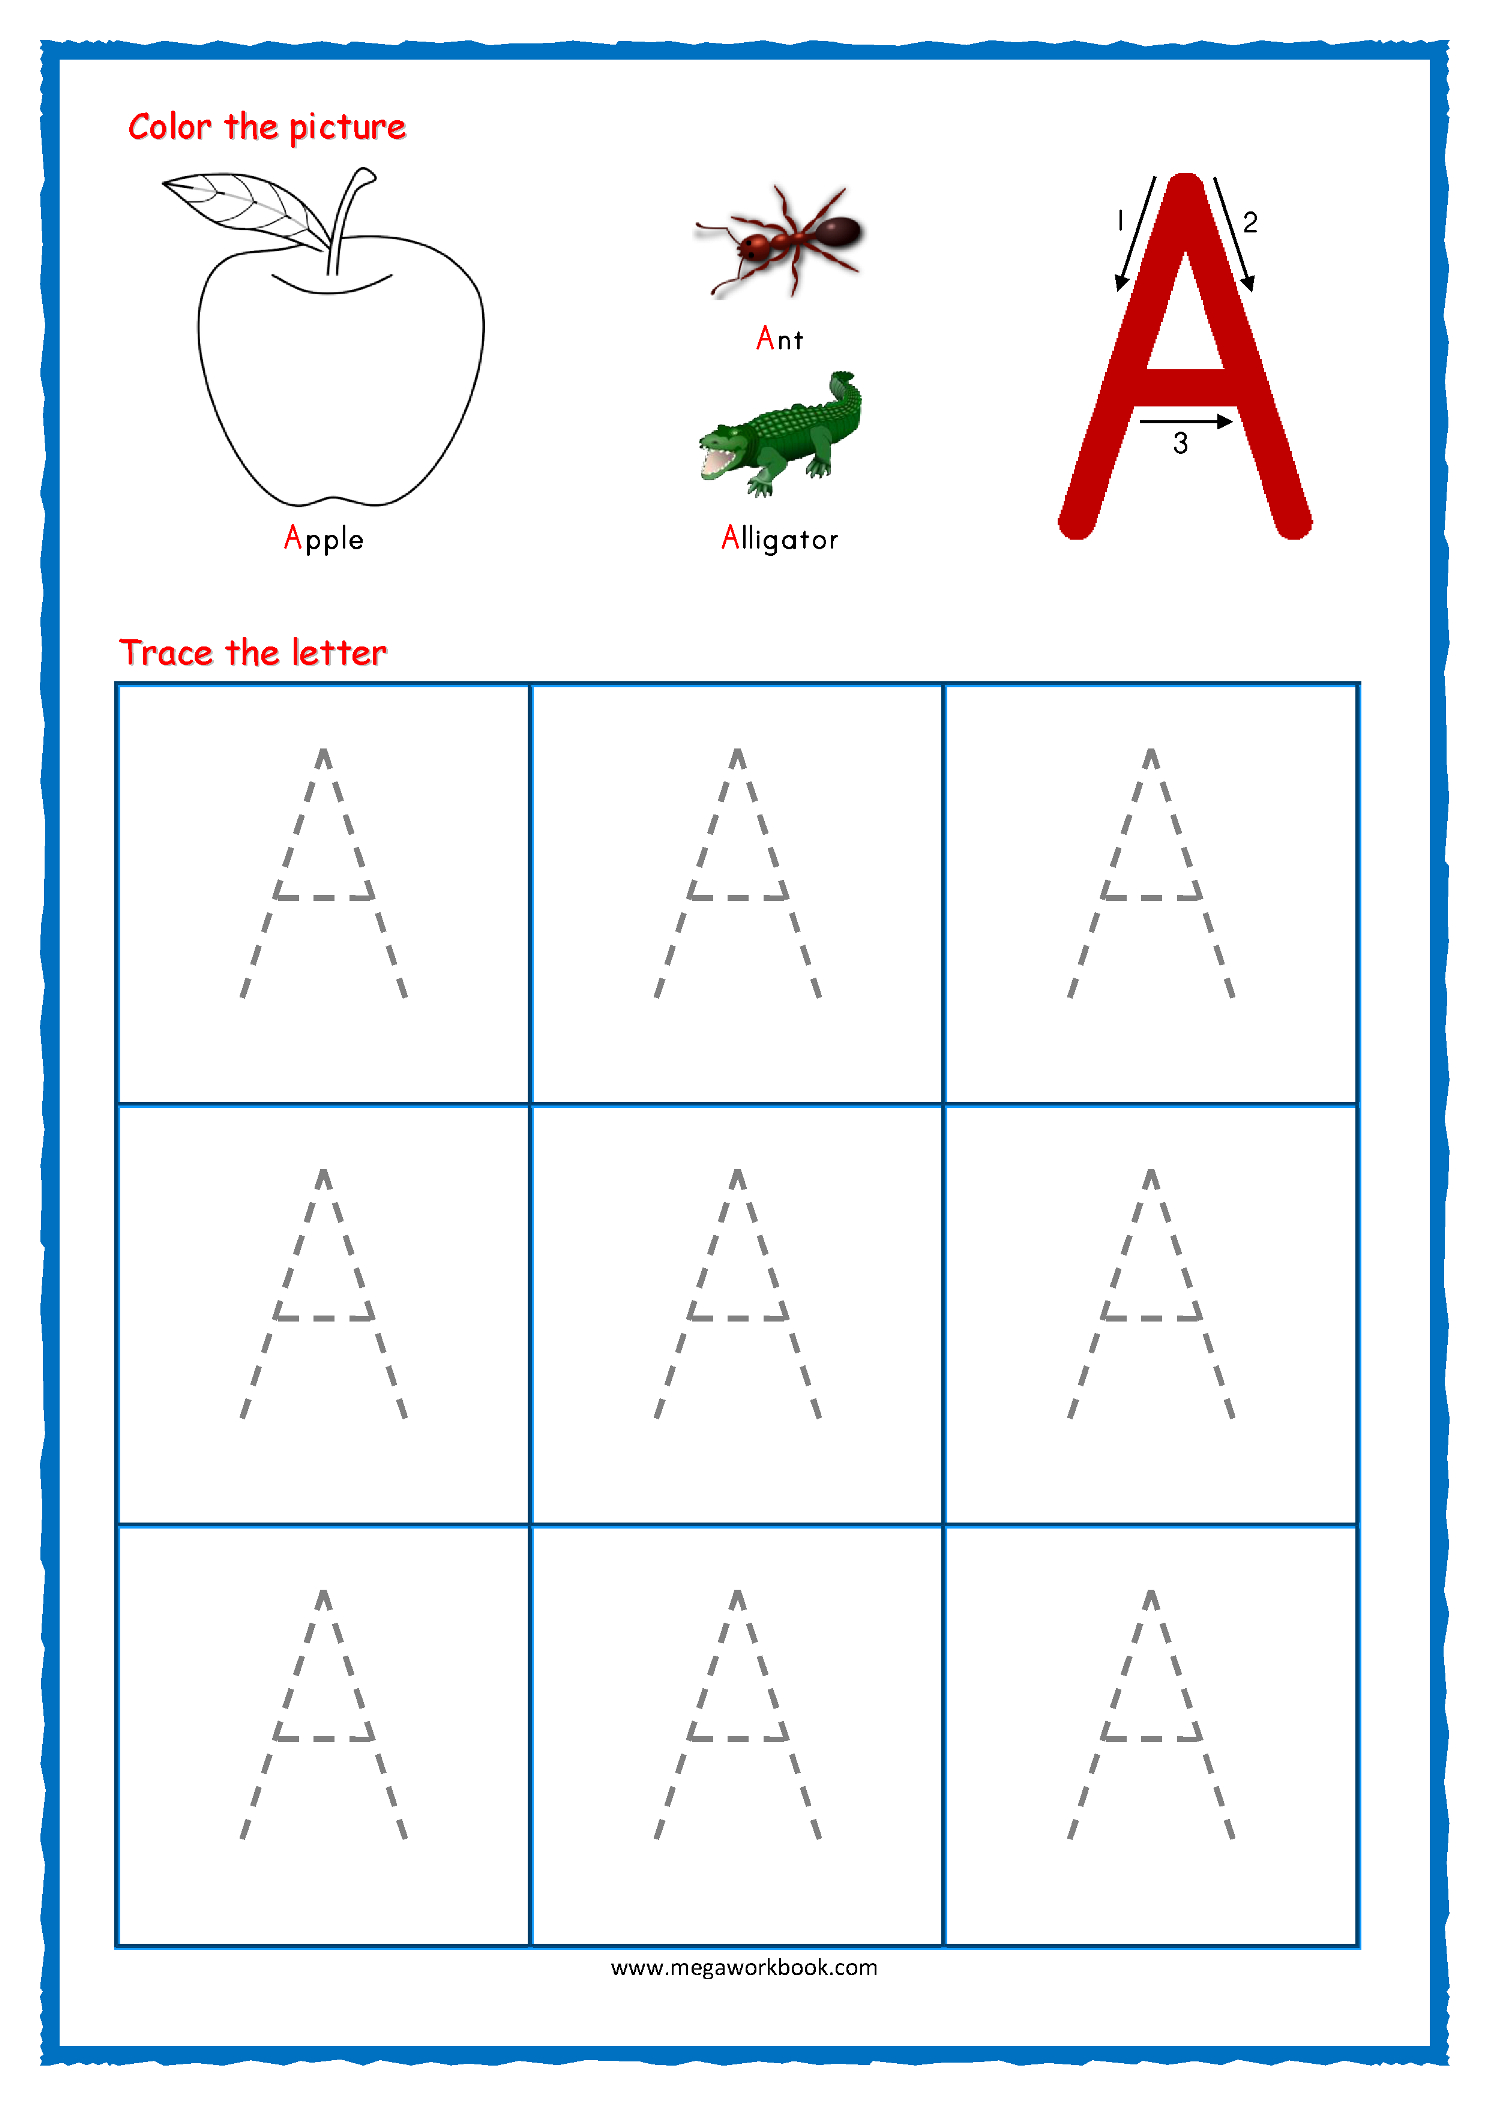 Coloring Book : Printable Letter Tracing Sheets For intended for A Tracing Letters